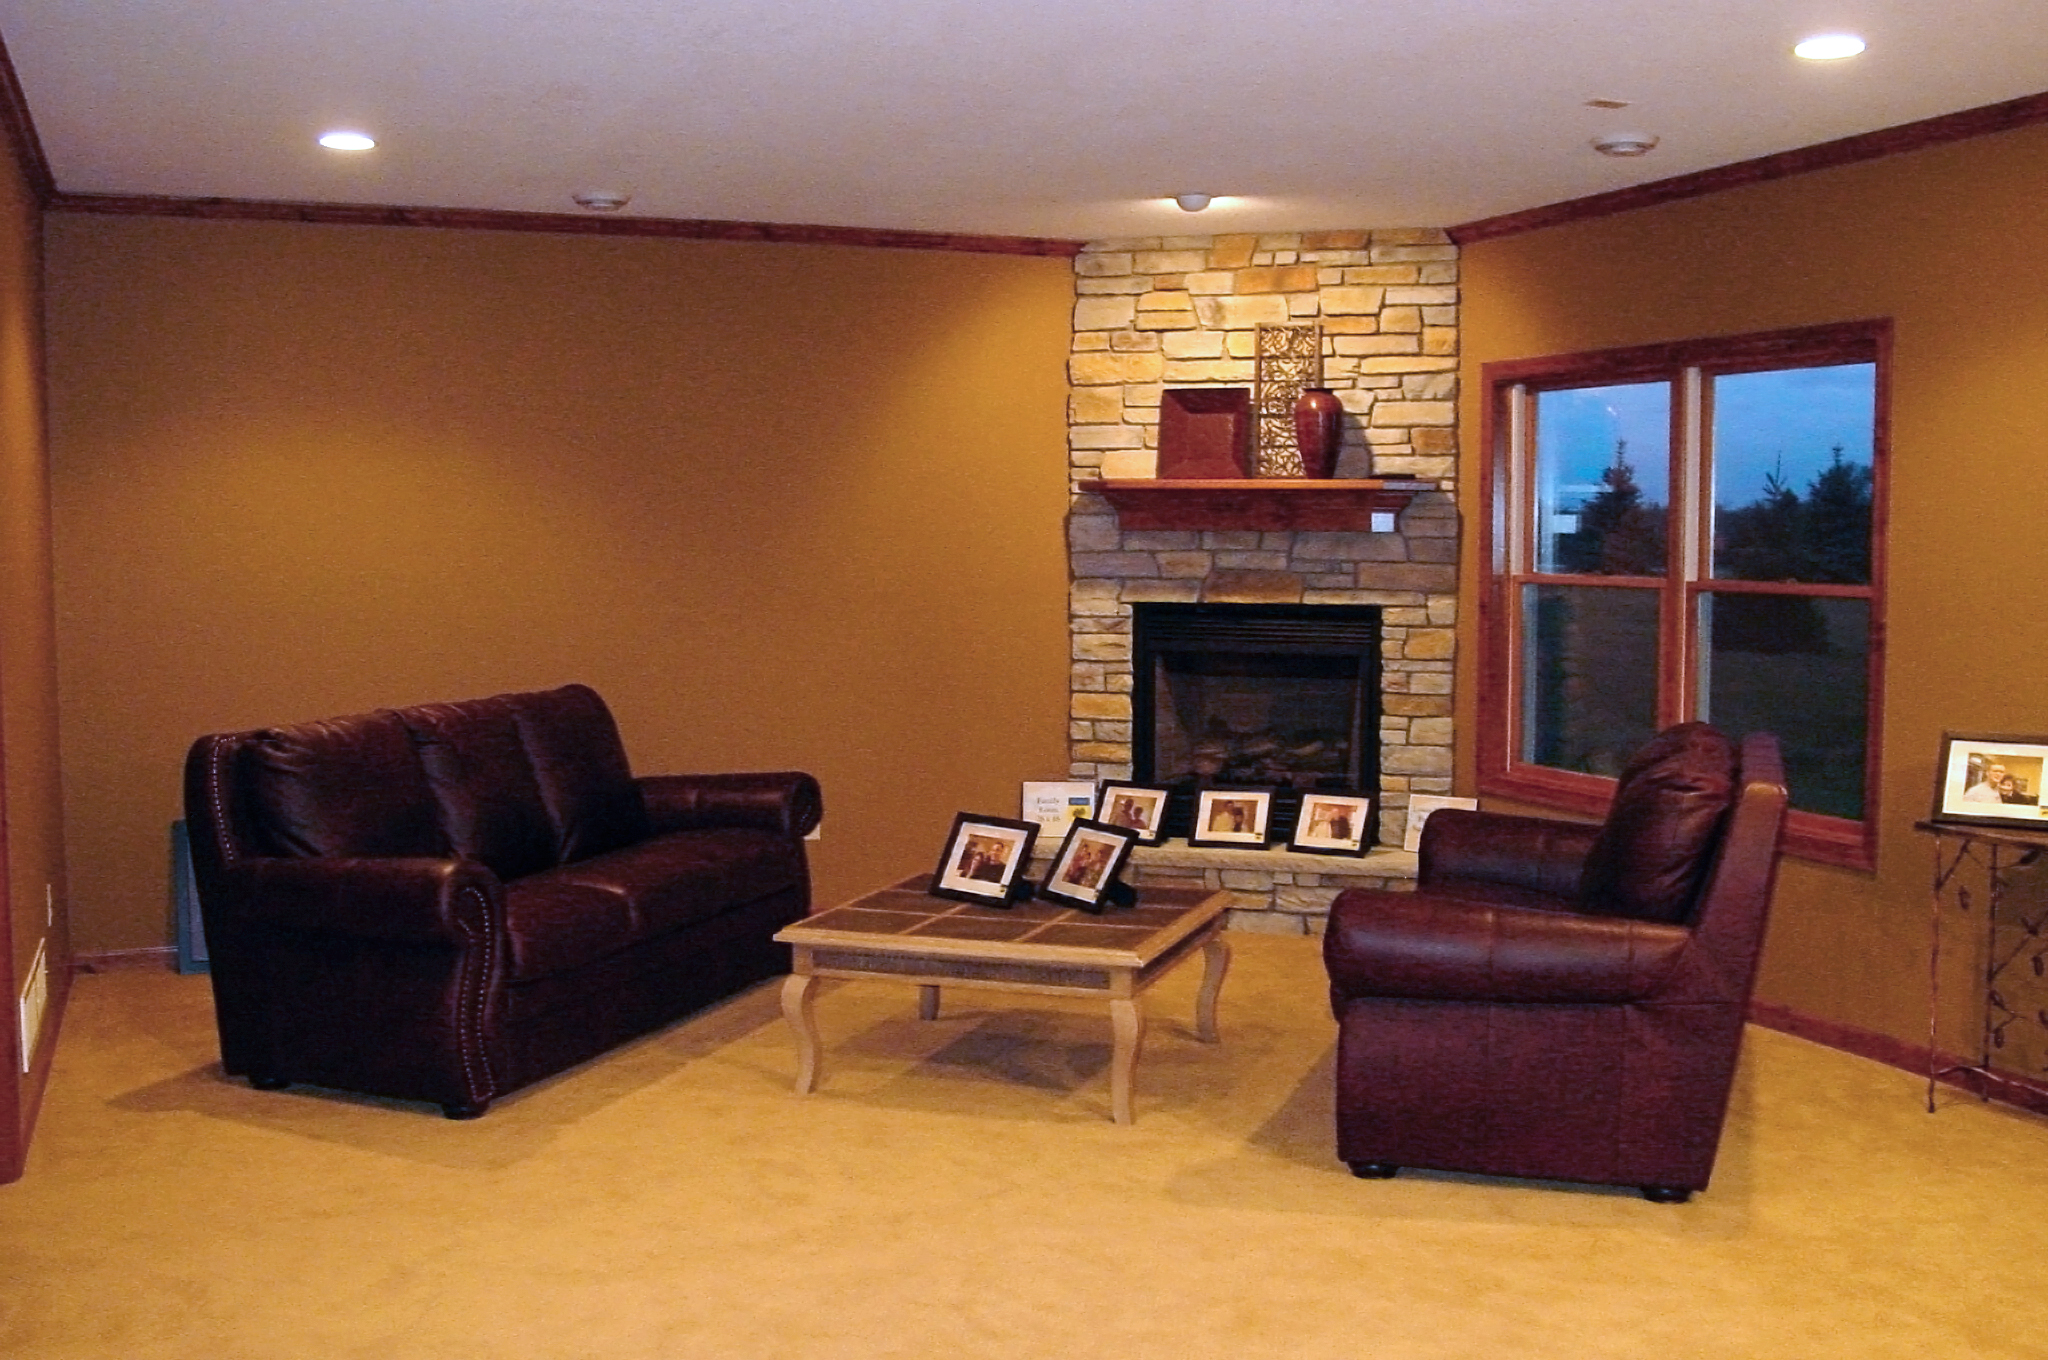 Lower level family room with stone fireplace